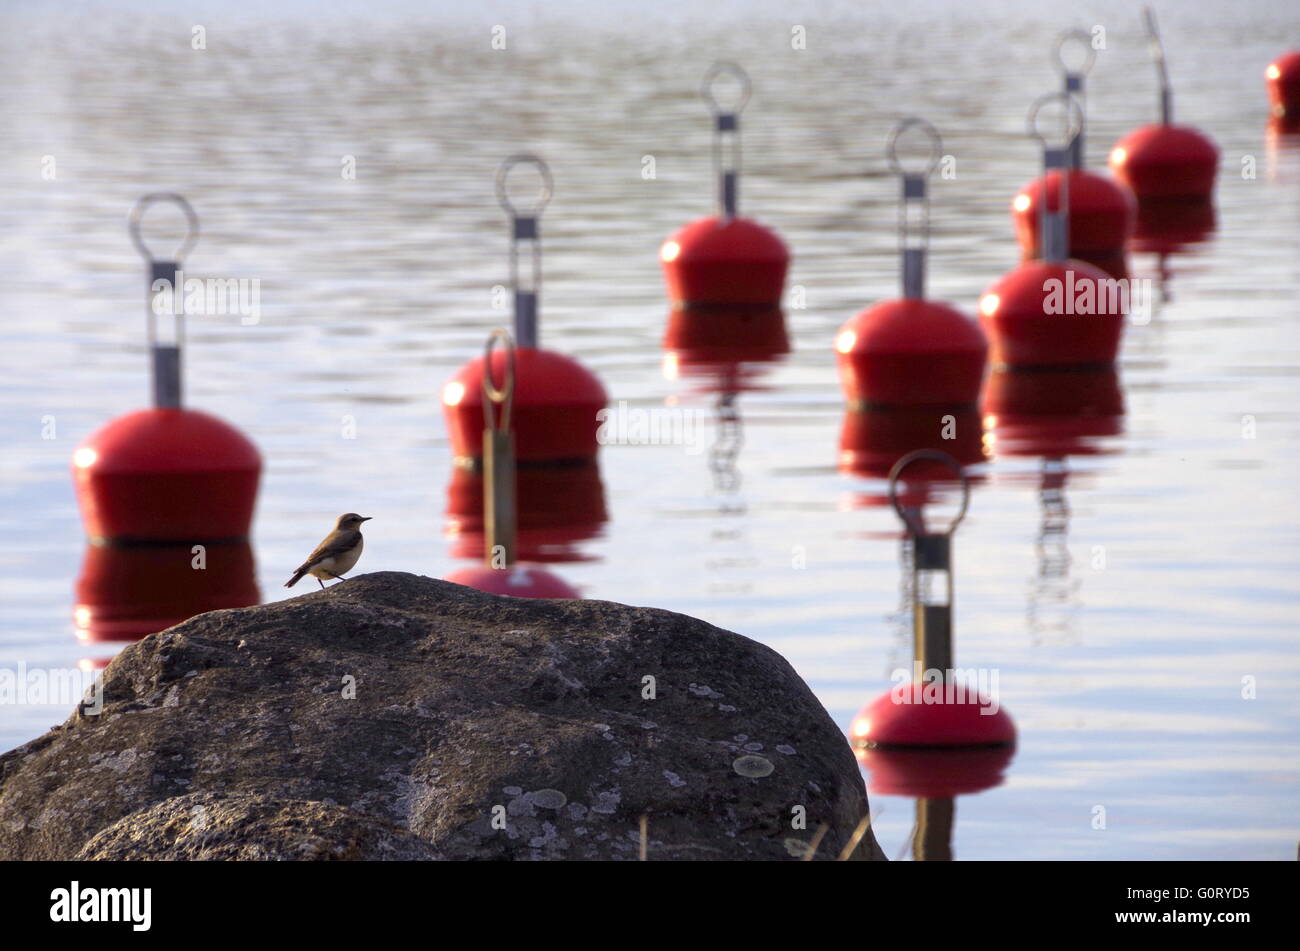 A bird sitting on a riverside stone in the background of red yacht club buoys in Pärnu, Estonia Stock Photo